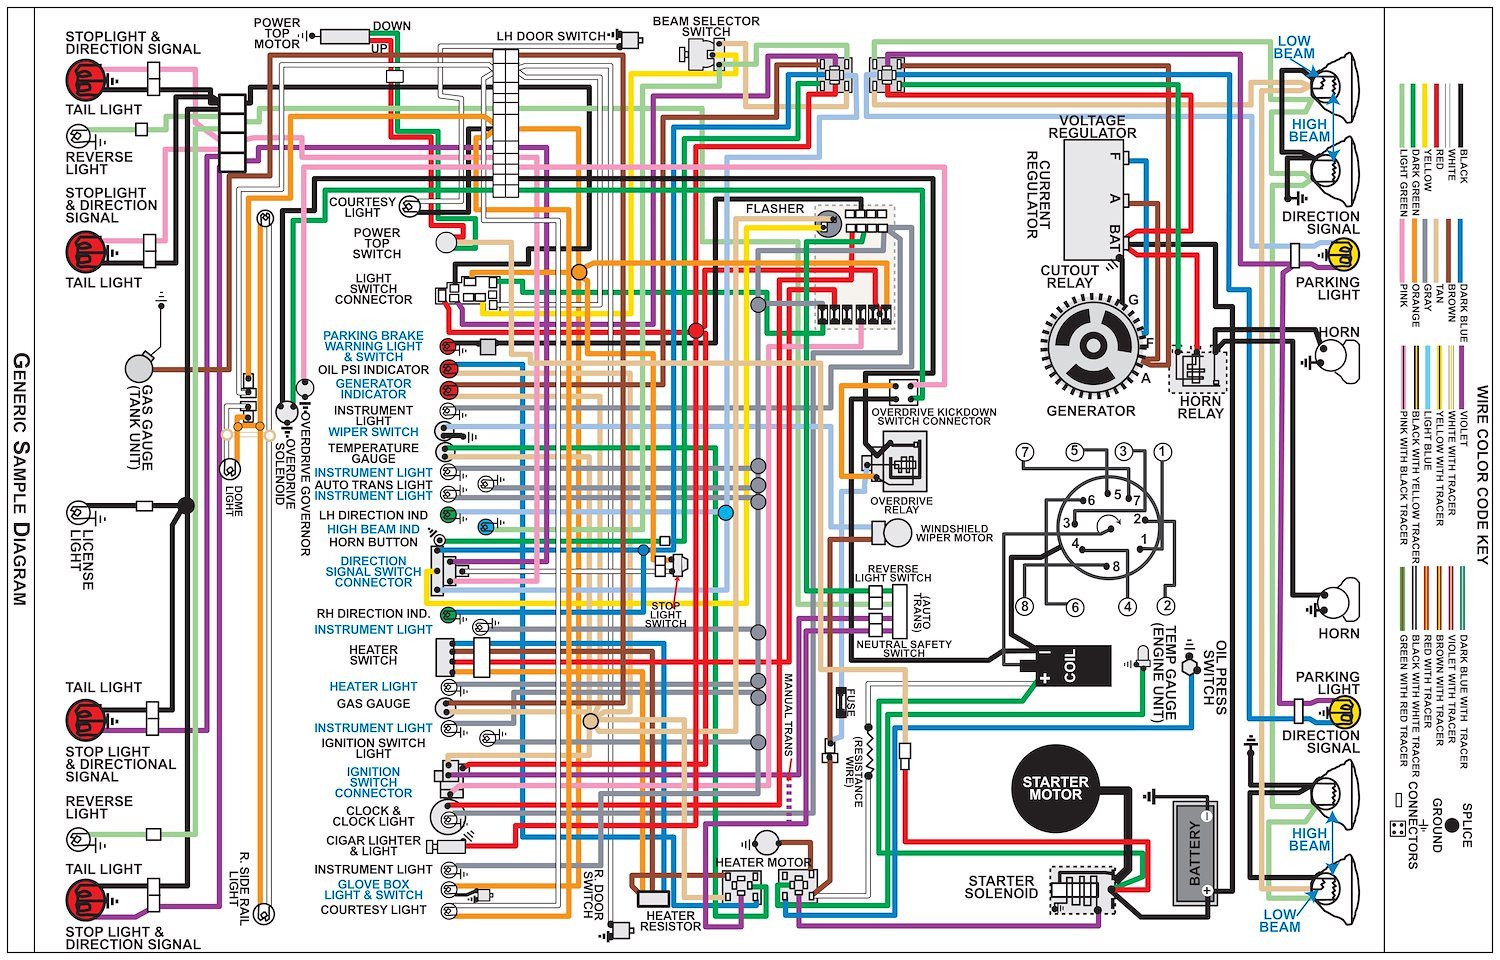 Wiring Diagram for 1940 Cadillac V8 Series 40-60S,